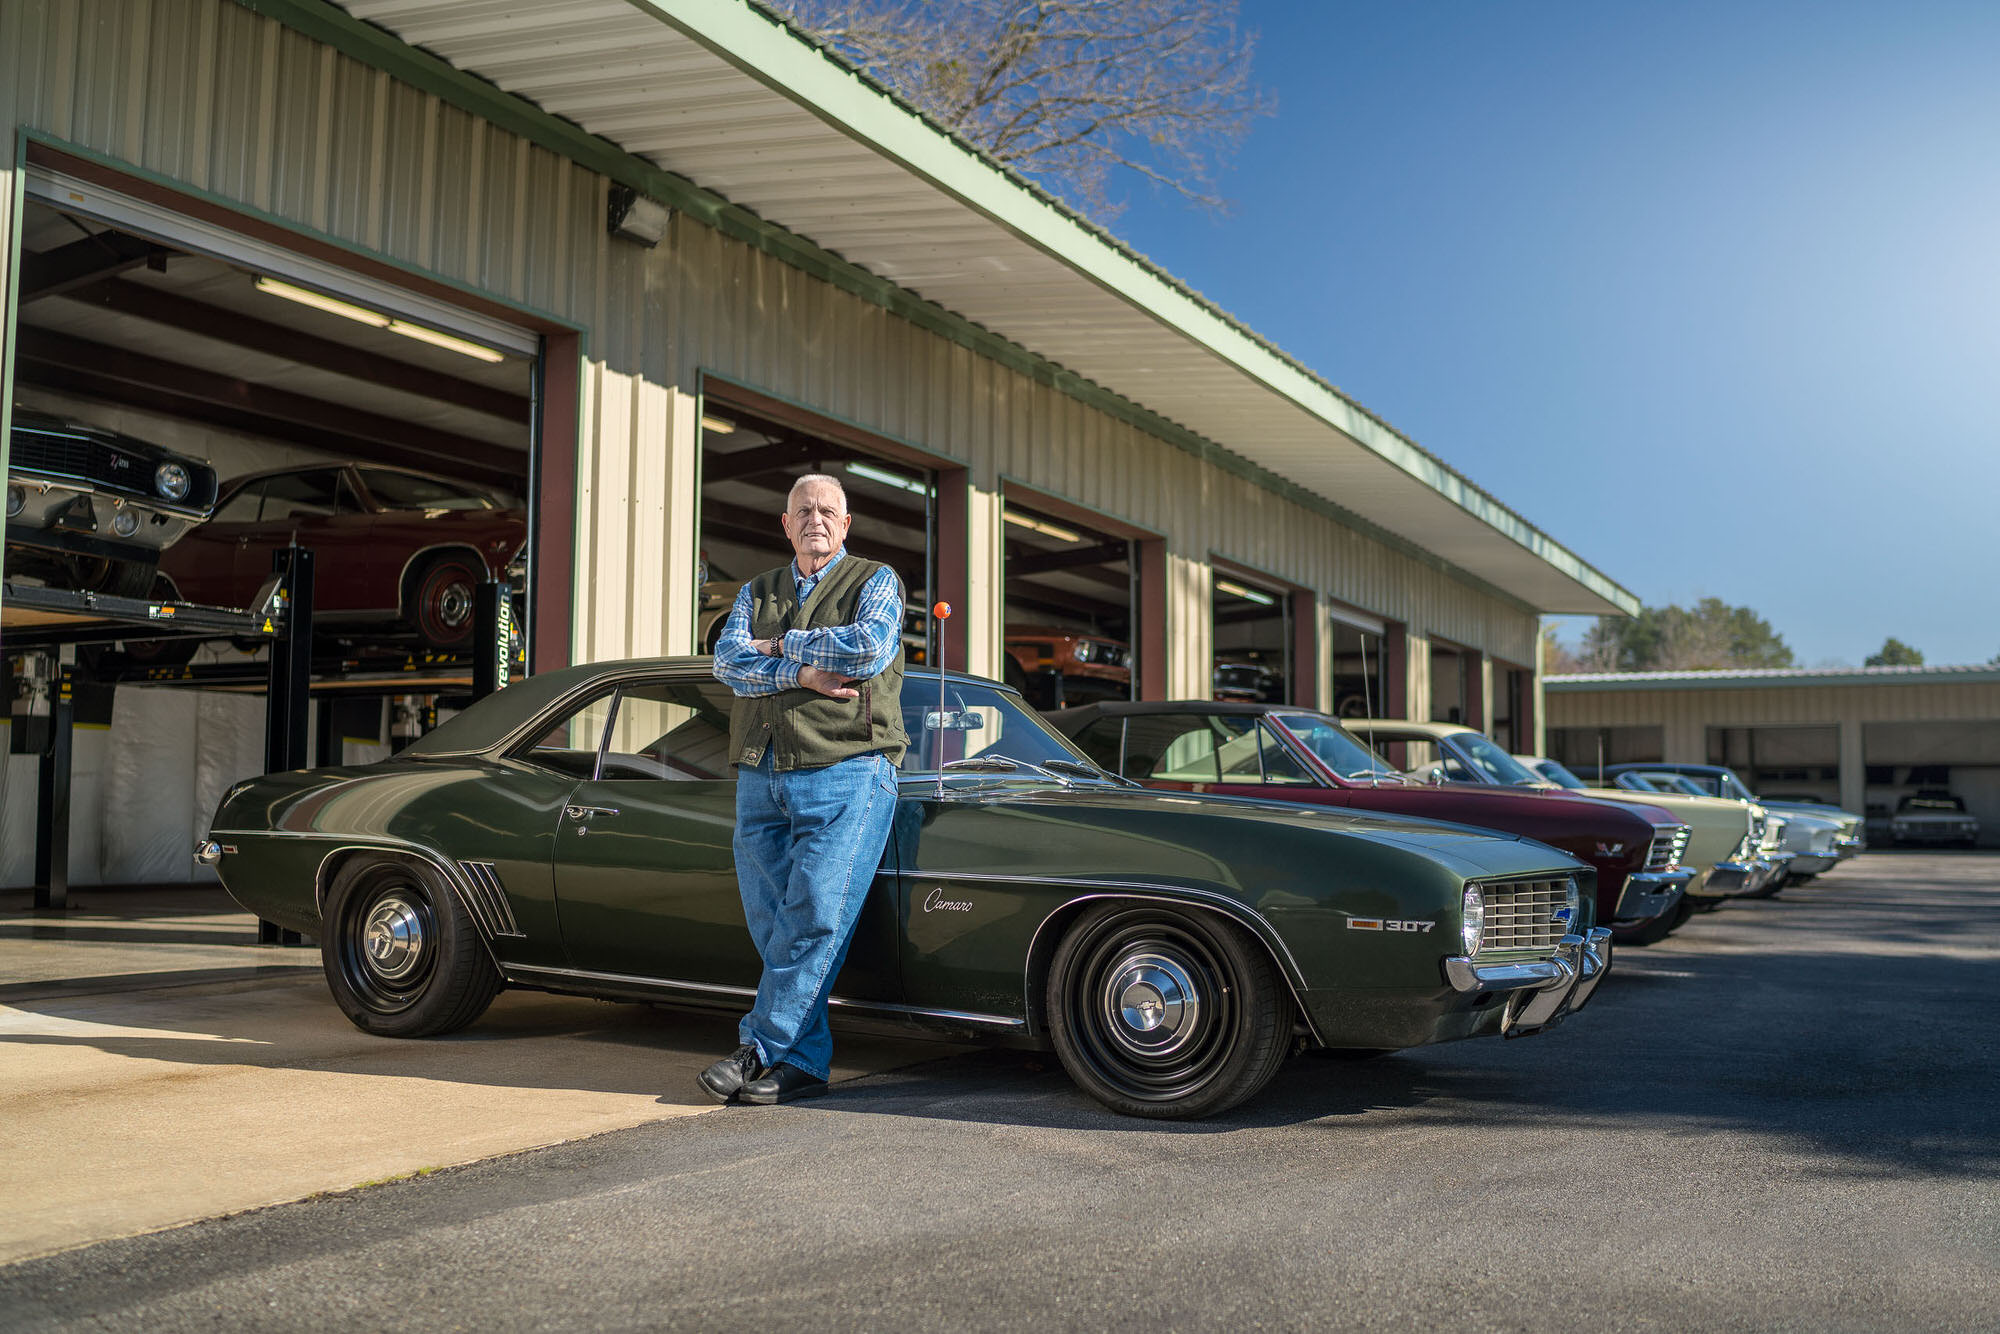 George Poteet posing in front of his classic cars at his home Mississippi garage. Photographed for Car And Driver Magazine.